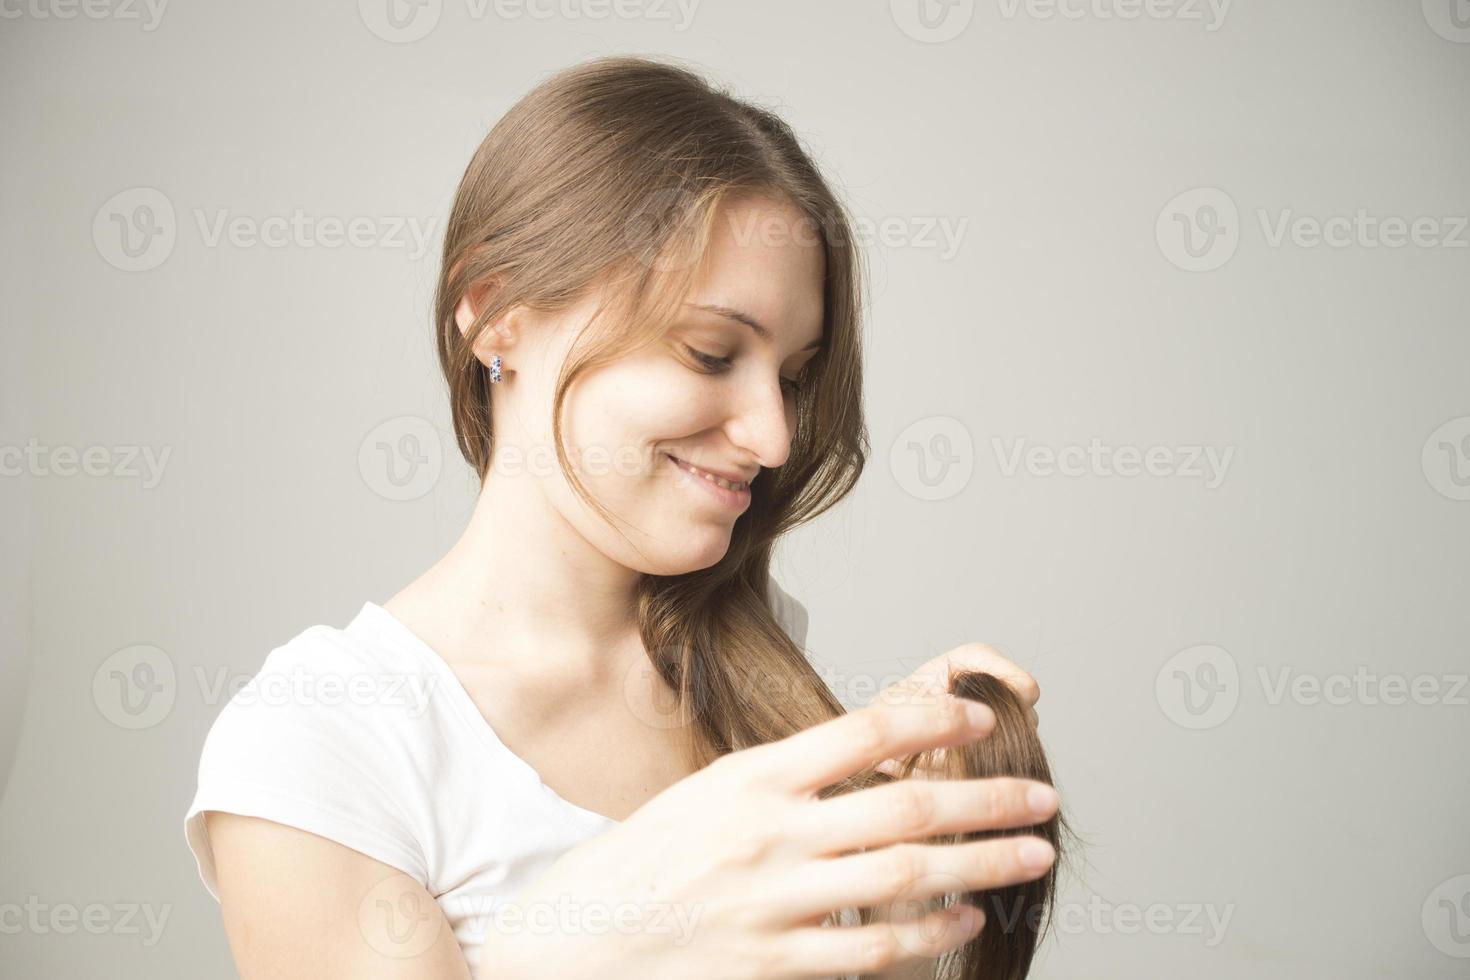 girl on a gray background holds a hair in her hand photo